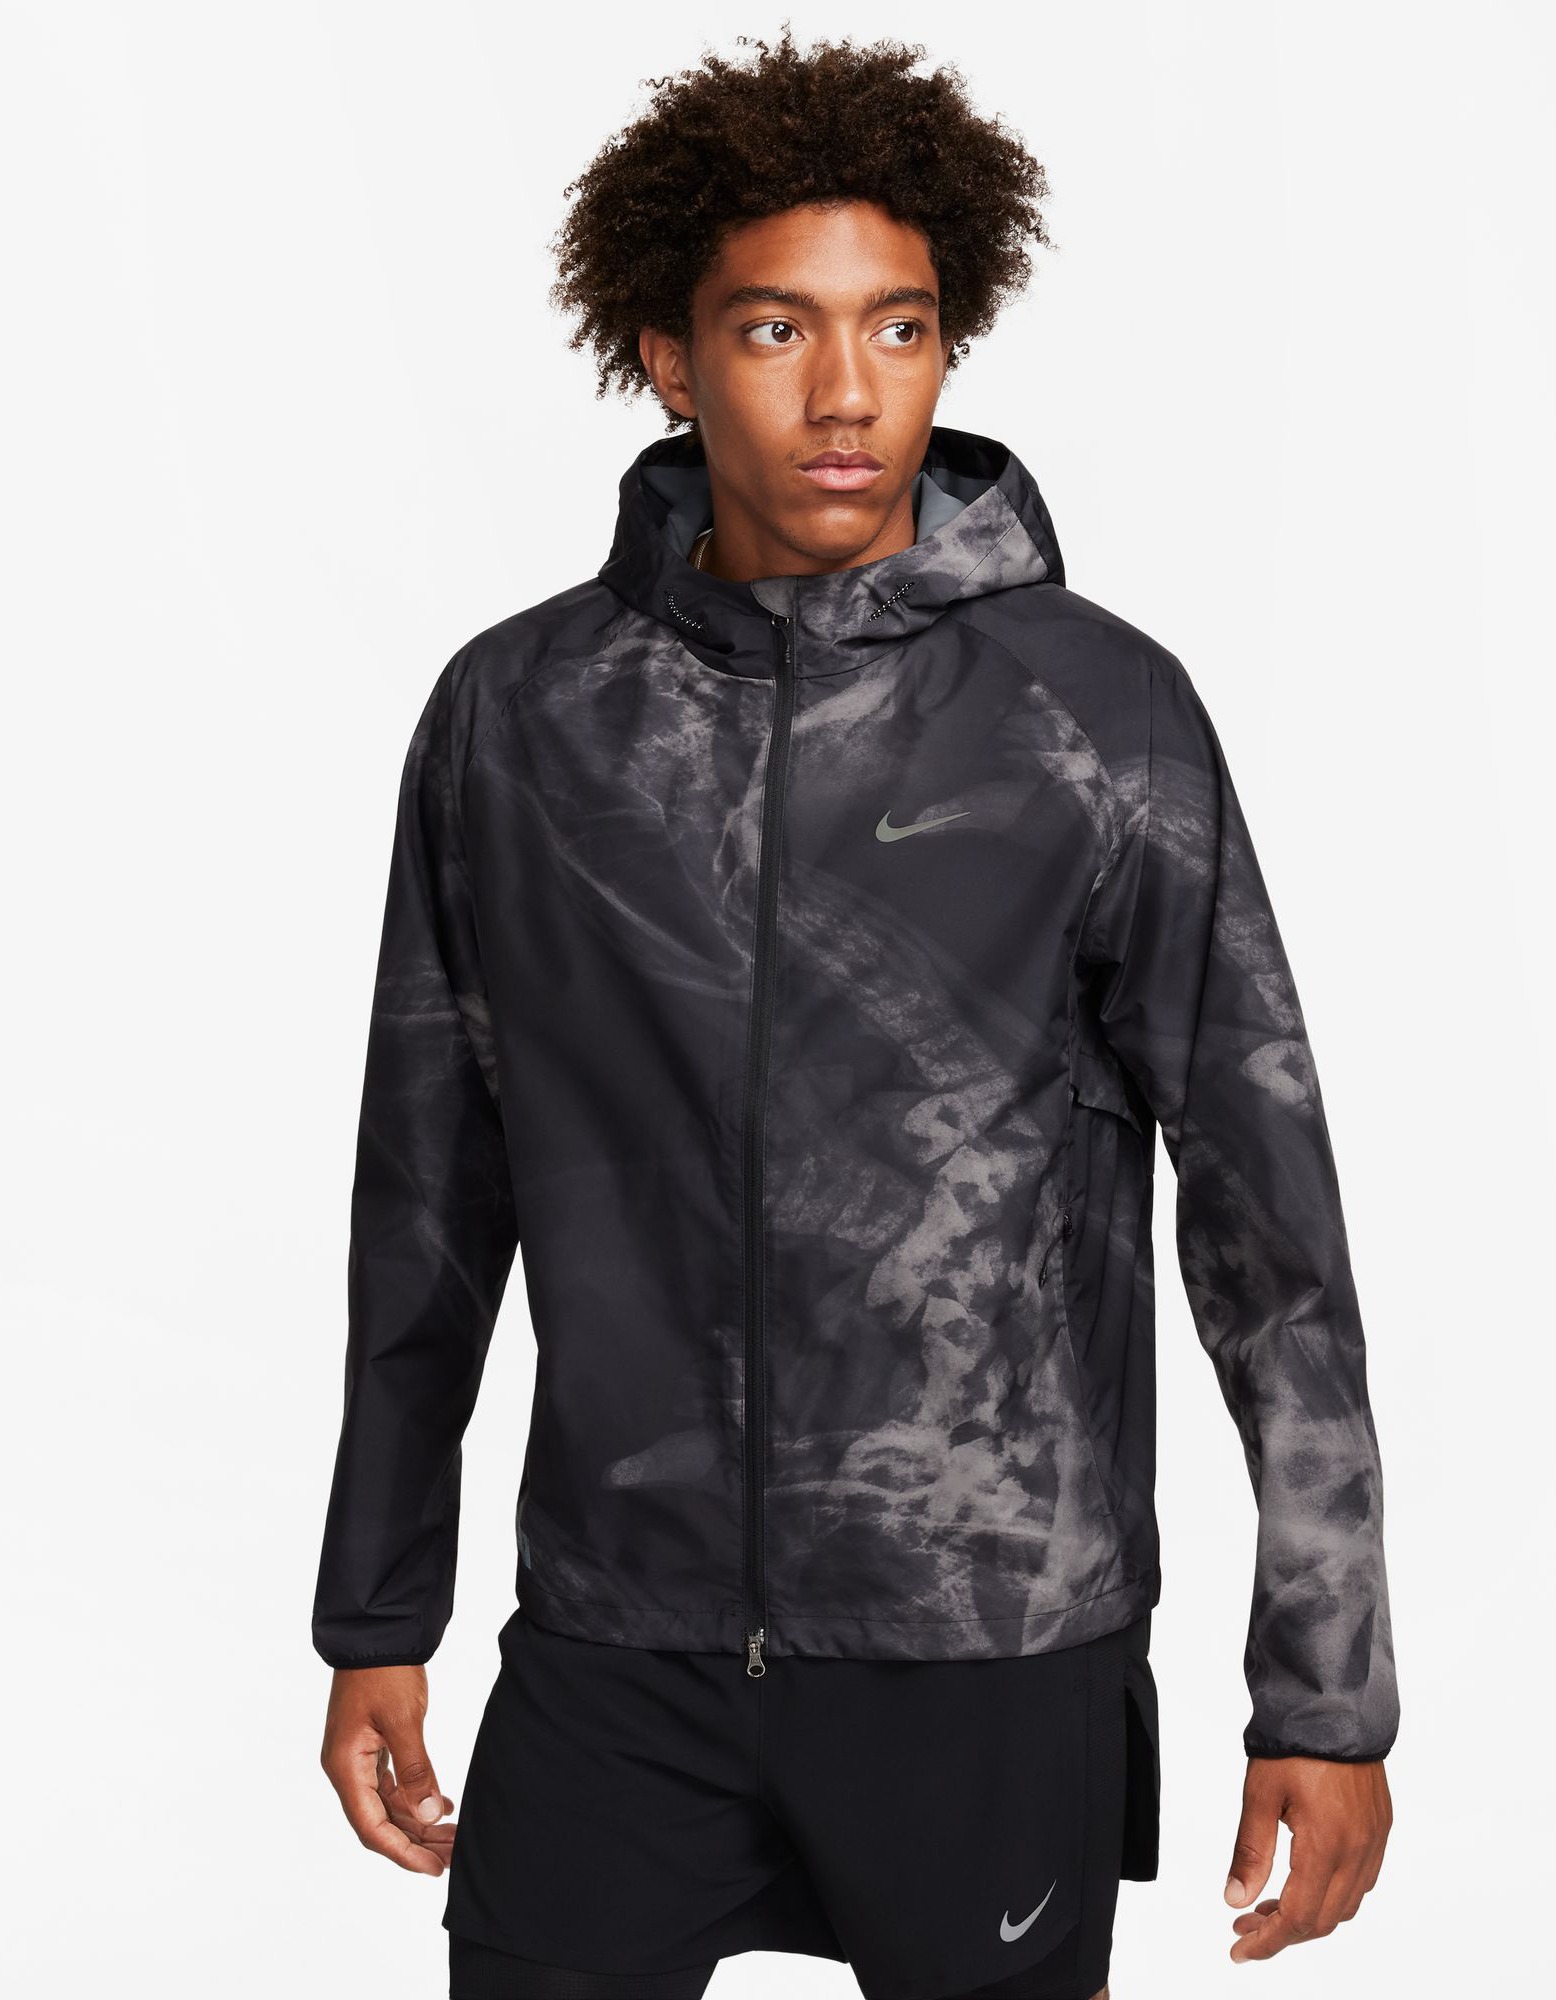 Nike Storm-FIT Running Division Jacket - Men's | Vancouver Running